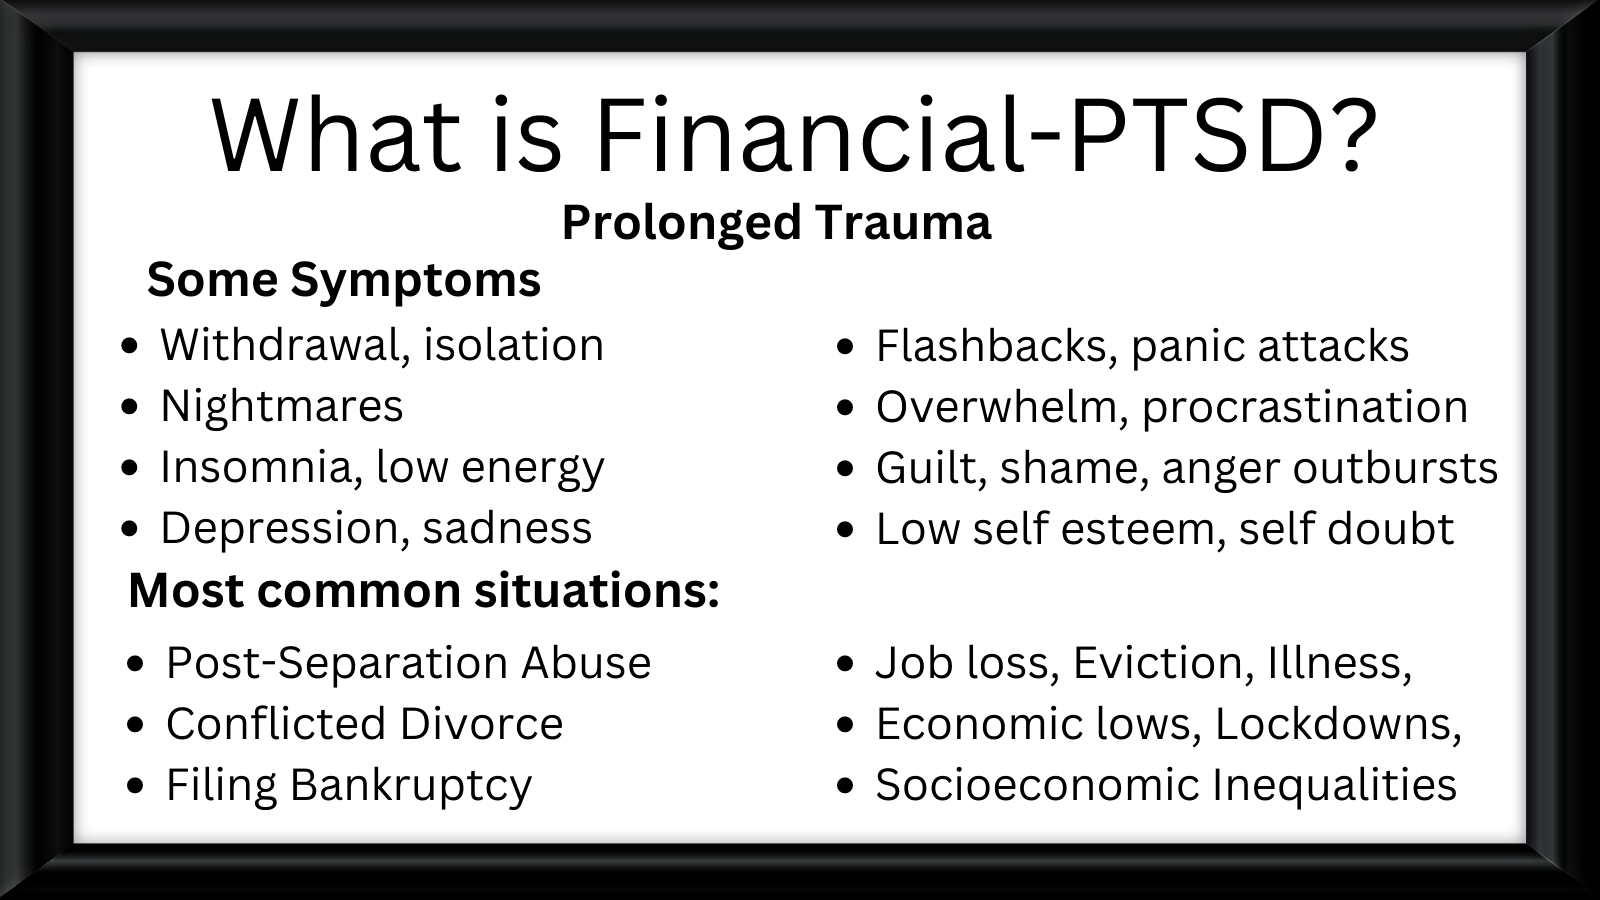 What is financial PTSD